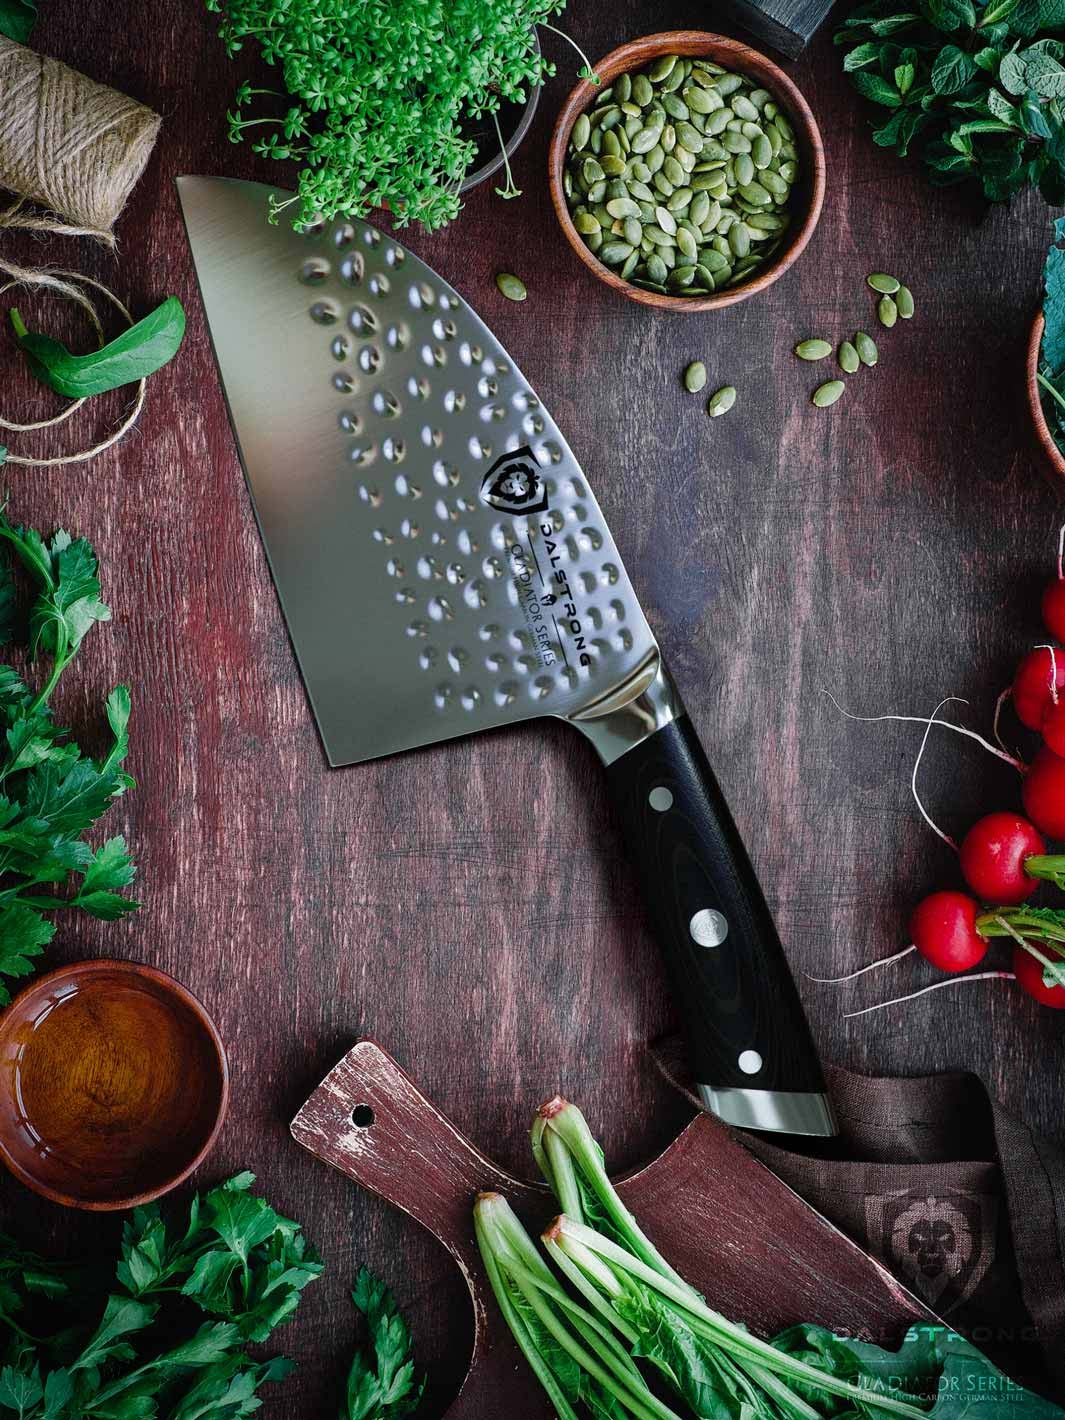 Dalstrong gladiator series 7.5 inch serbian knife with black handle surrounded by different kinds of green herbs.